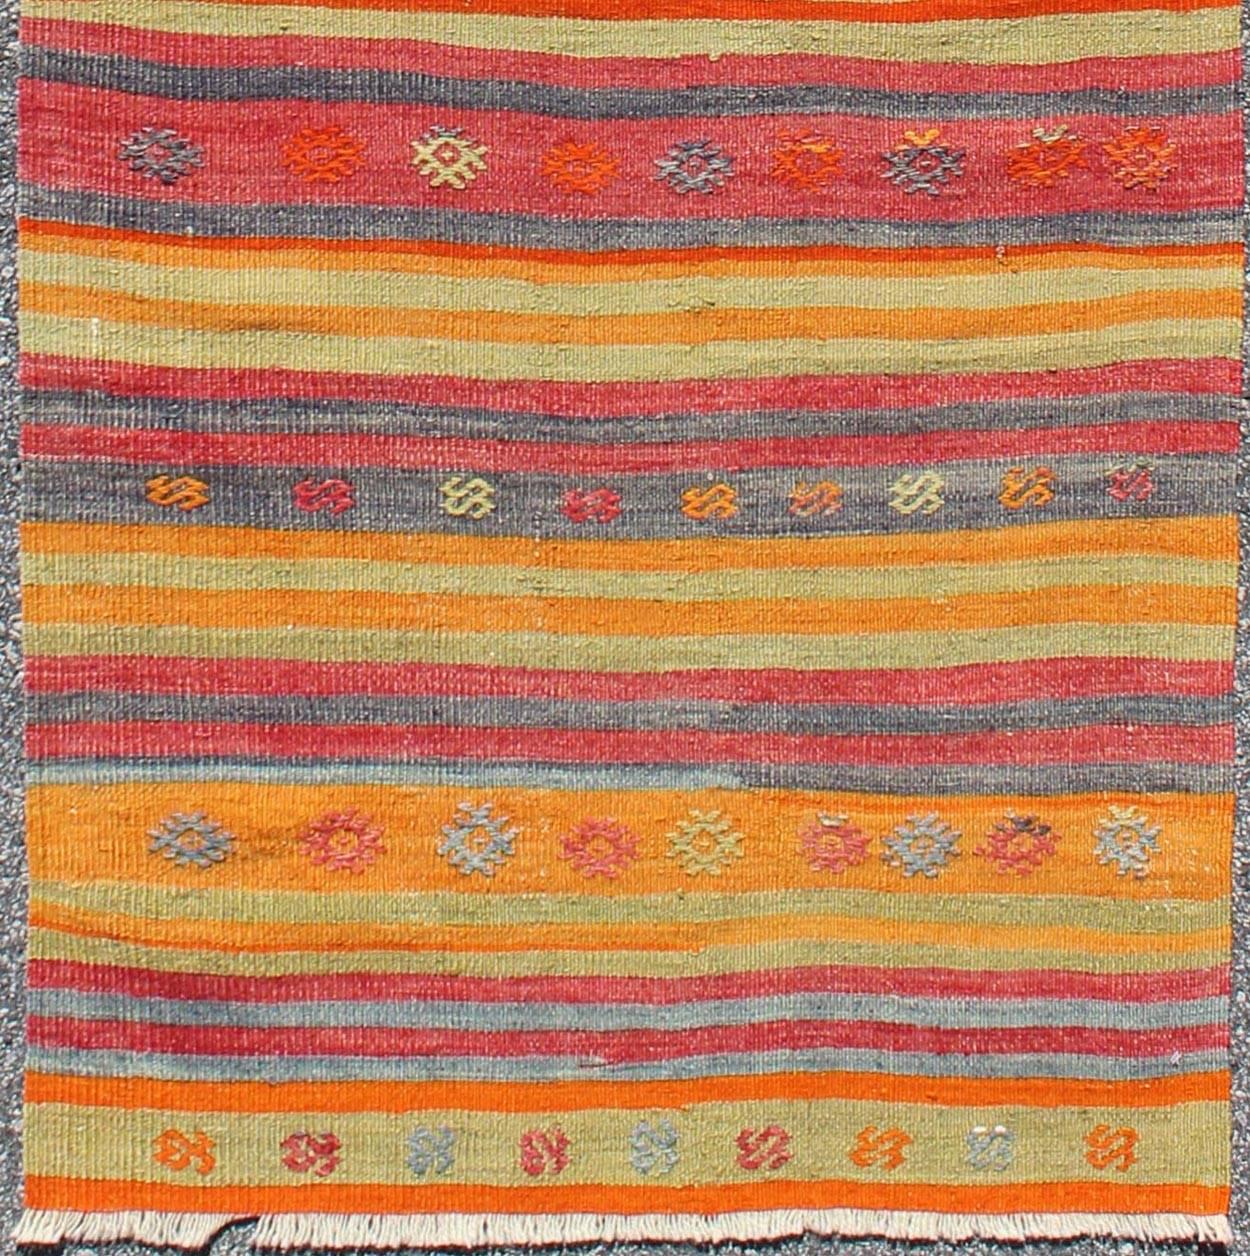 Vintage Turkish Oushak rug with geometric tribal designs and colorful stripes, rug ned-119, country of origin / type: Turkey / Kilim, circa mid-20th century

Featuring tribal shapes rendered in a repeating horizontal stripe design, this unique